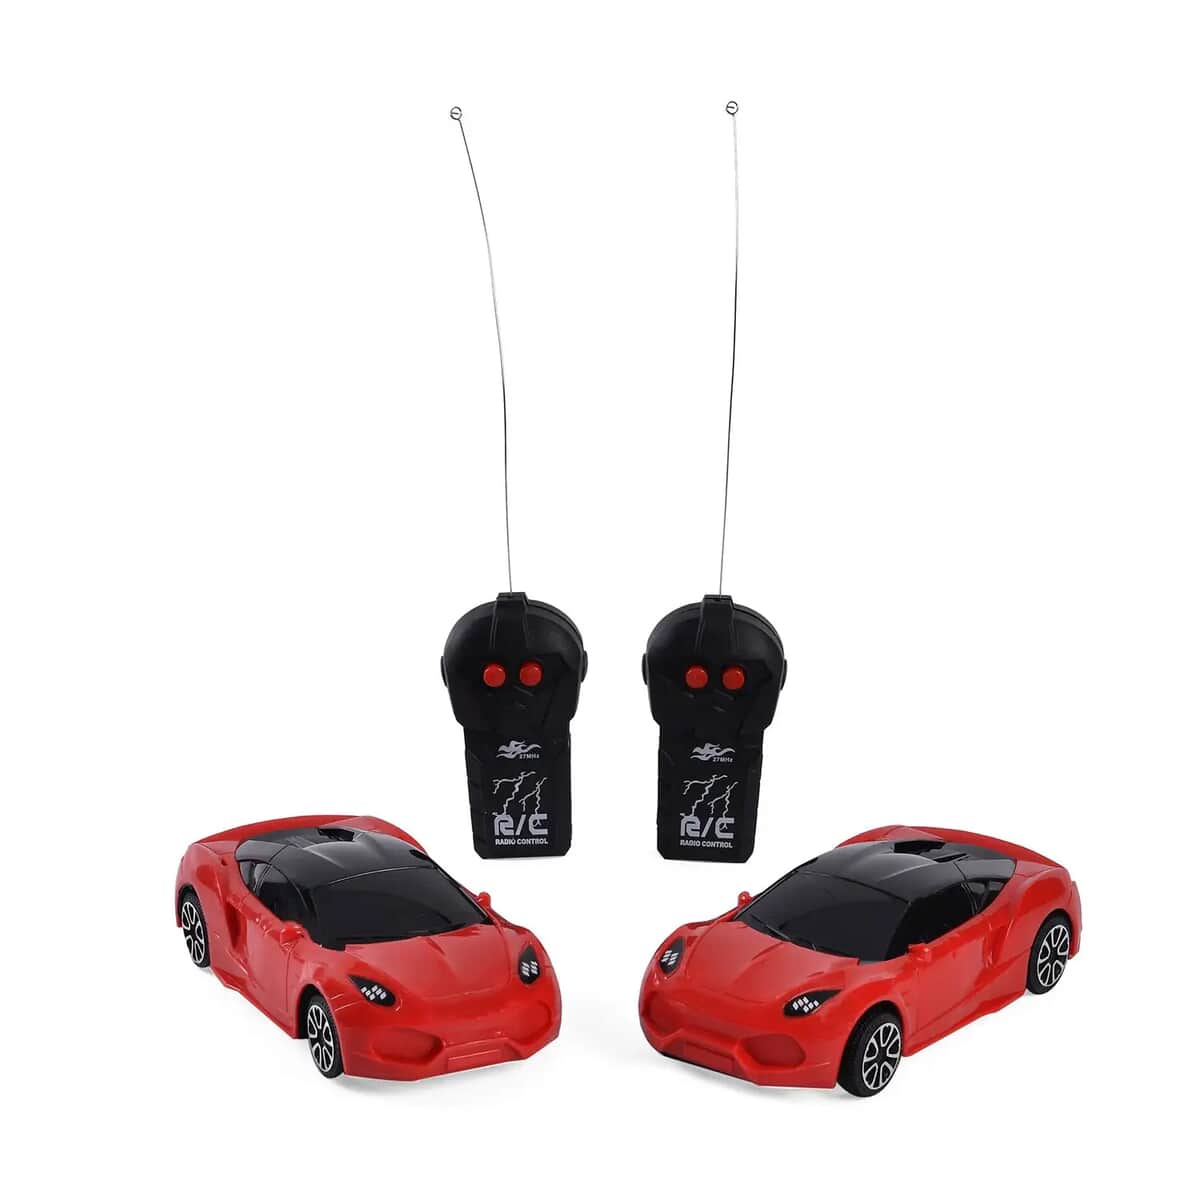 Red 4 Channels RC Stunt Car with Lights and Remote Control, Kids Stunt Car Toy For Birthday Gift (3xAA for Car, 2xAA for Controller Battery Not Included) image number 0